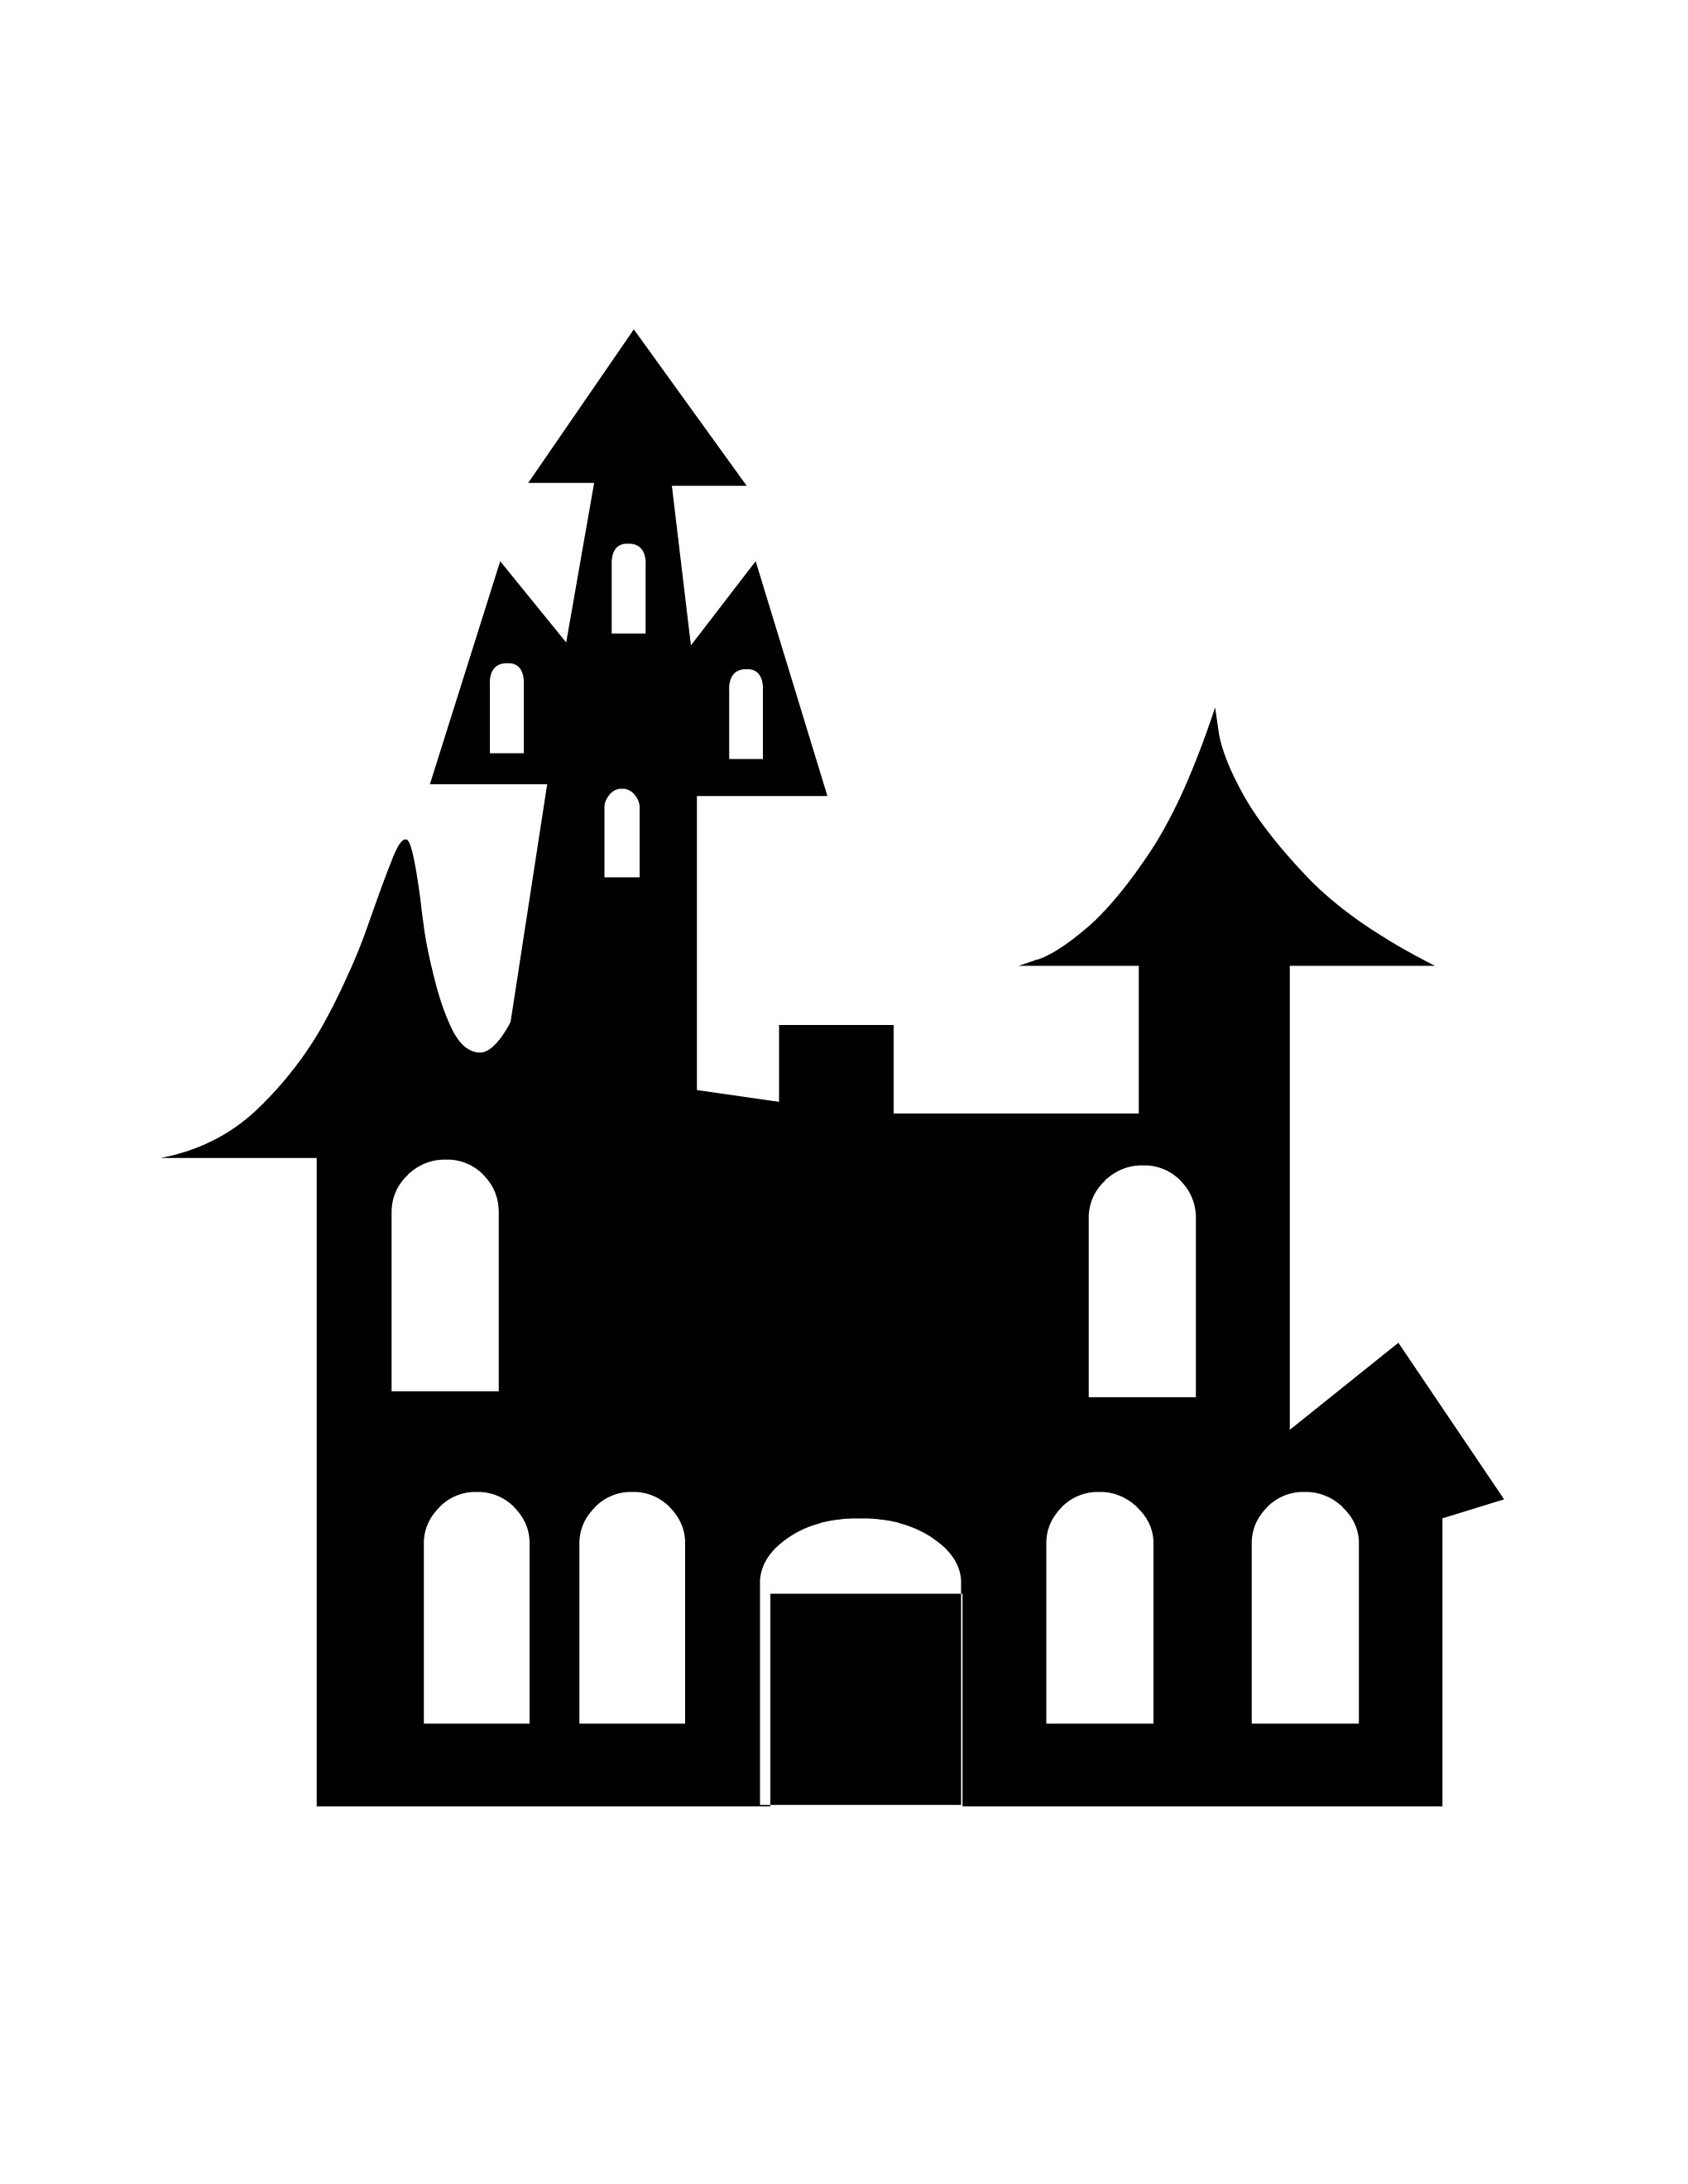 House Silhouette   Clipart Best